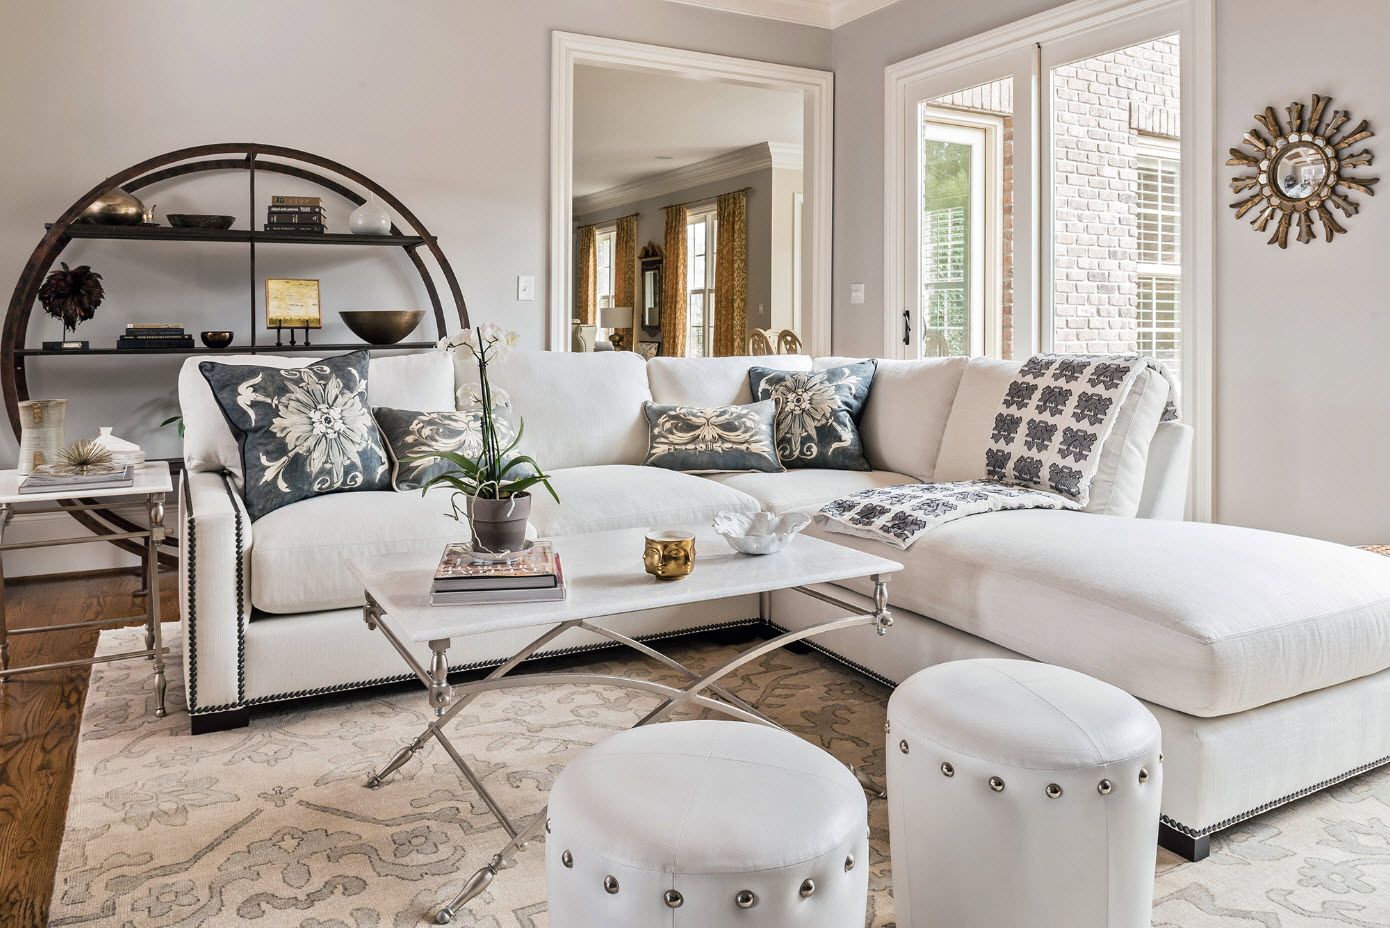 A Living Room Decorated in Your Personal Style!